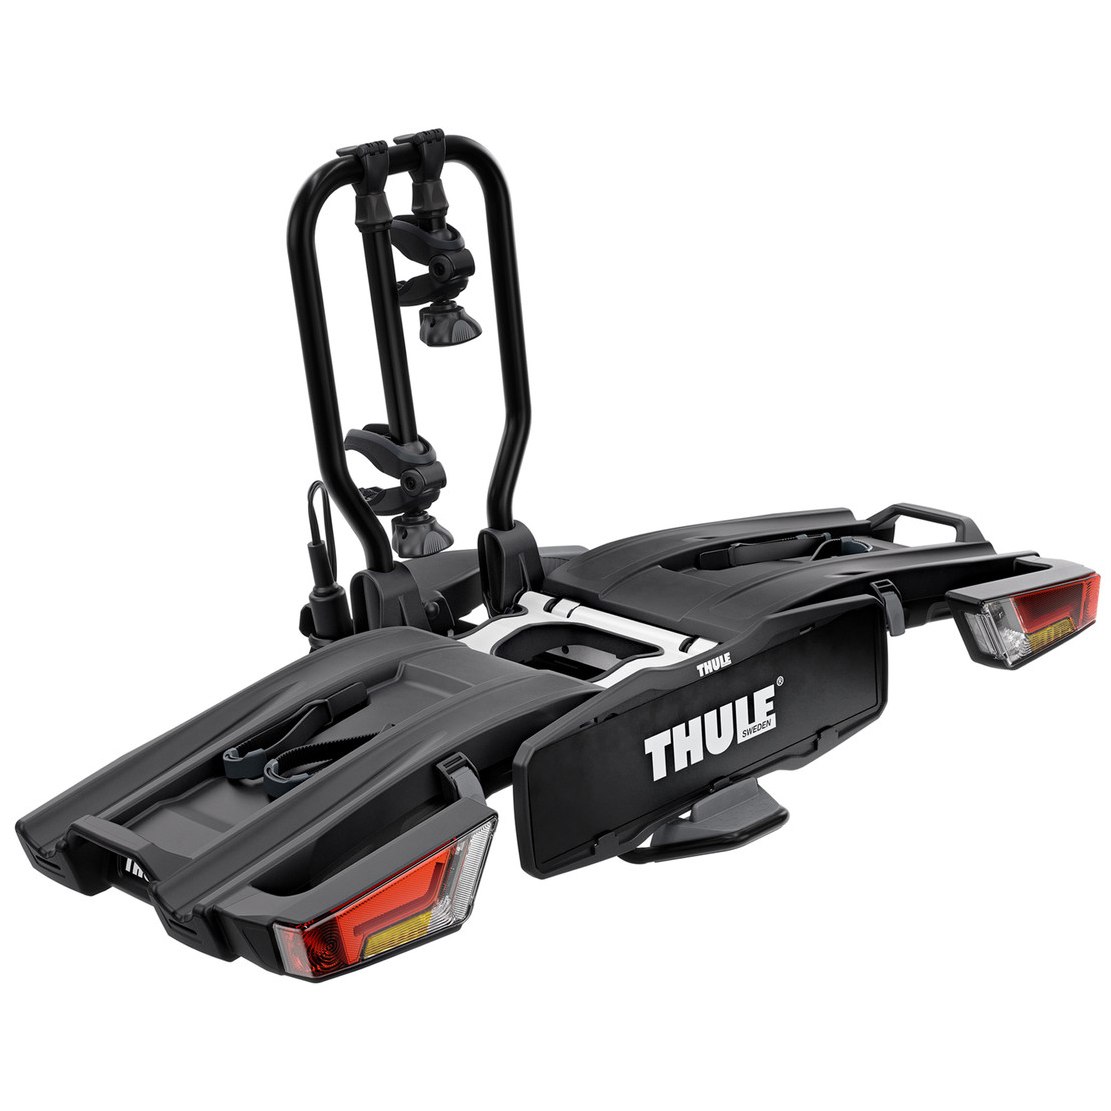 Picture of Thule EasyFold XT 2 Bike Rack for two Bikes without Bag and Rim Protector - black